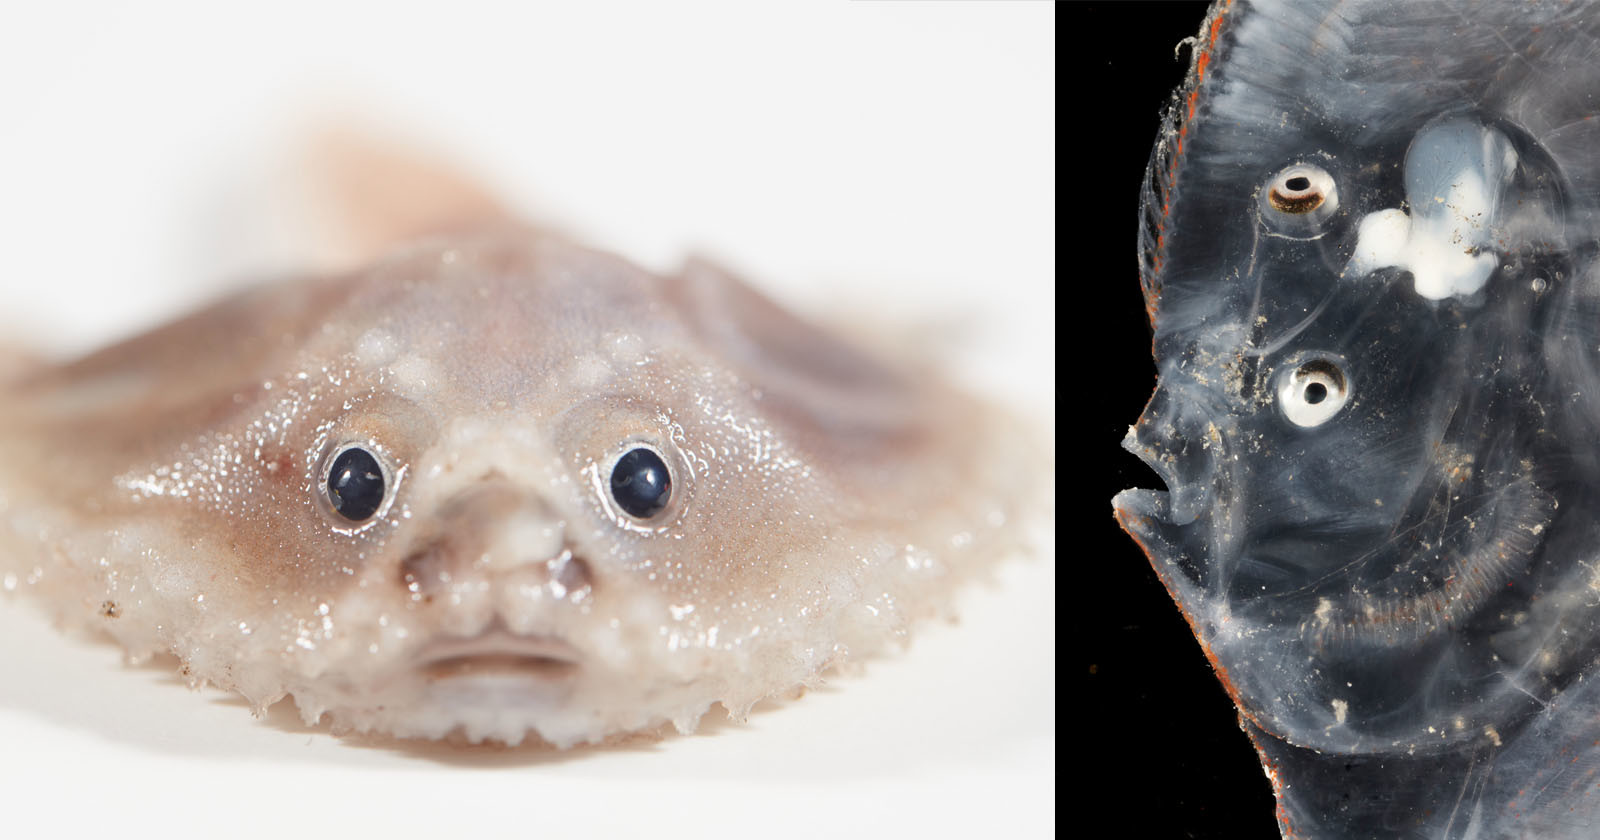  photos newly discovered deep-sea creatures living remote 